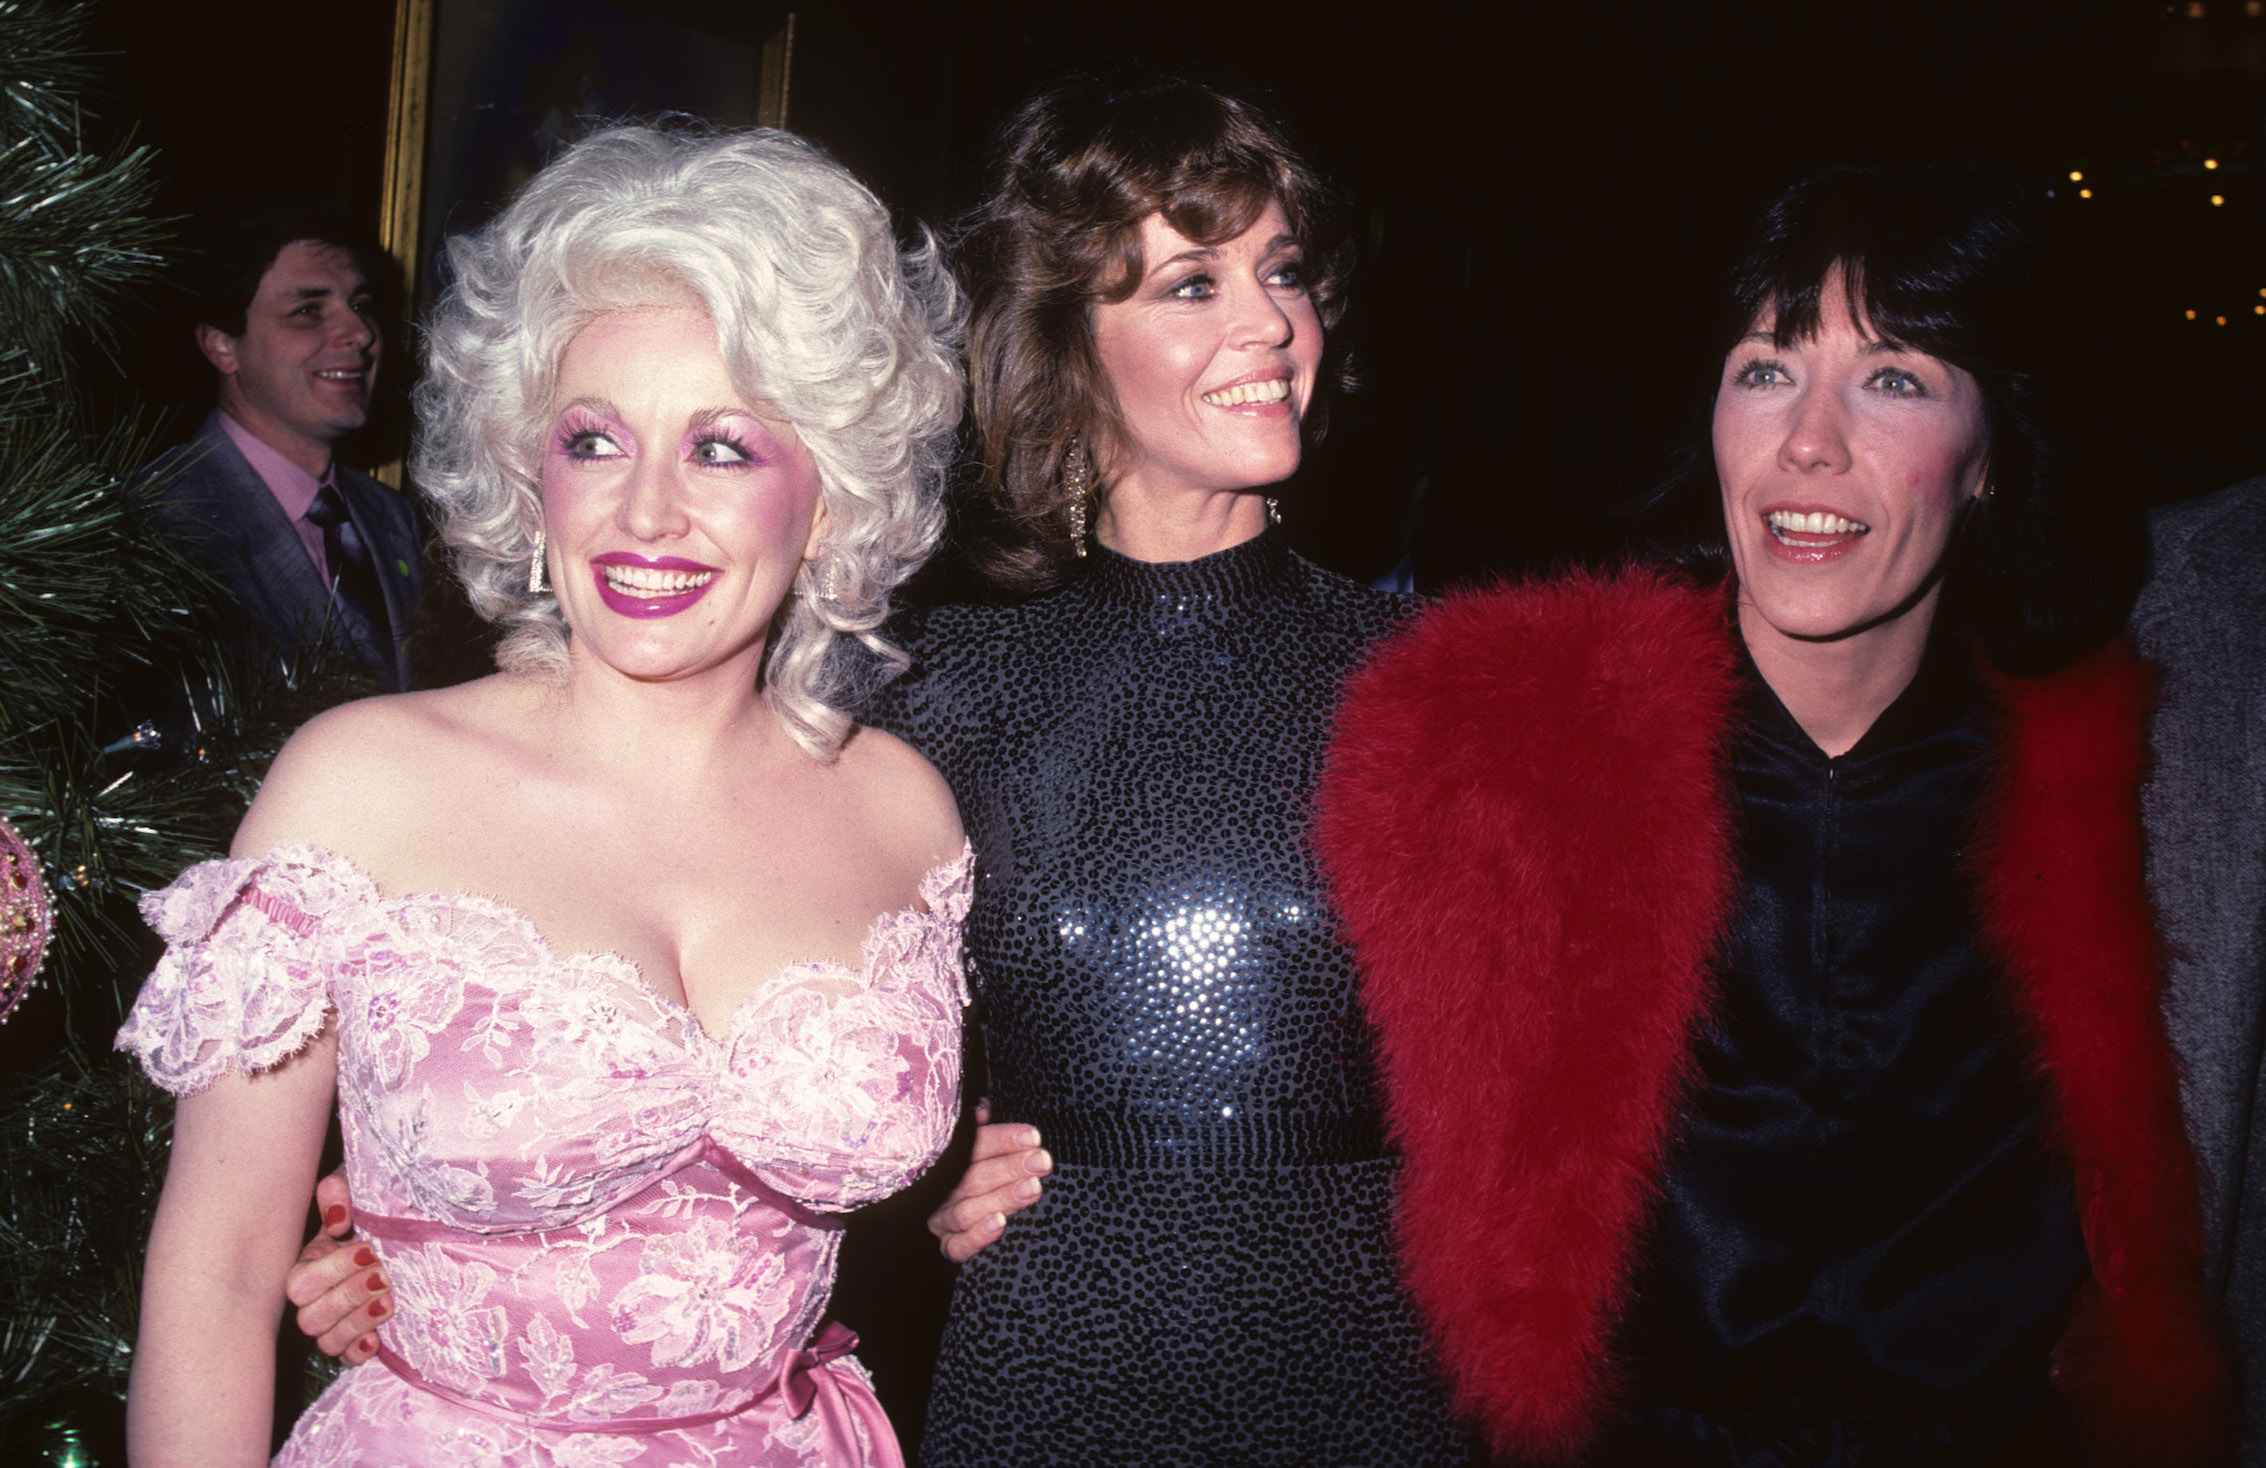 Dolly Parton, Jane Fonda, and Lily Tomlin at the film premiere of '9 to 5' 